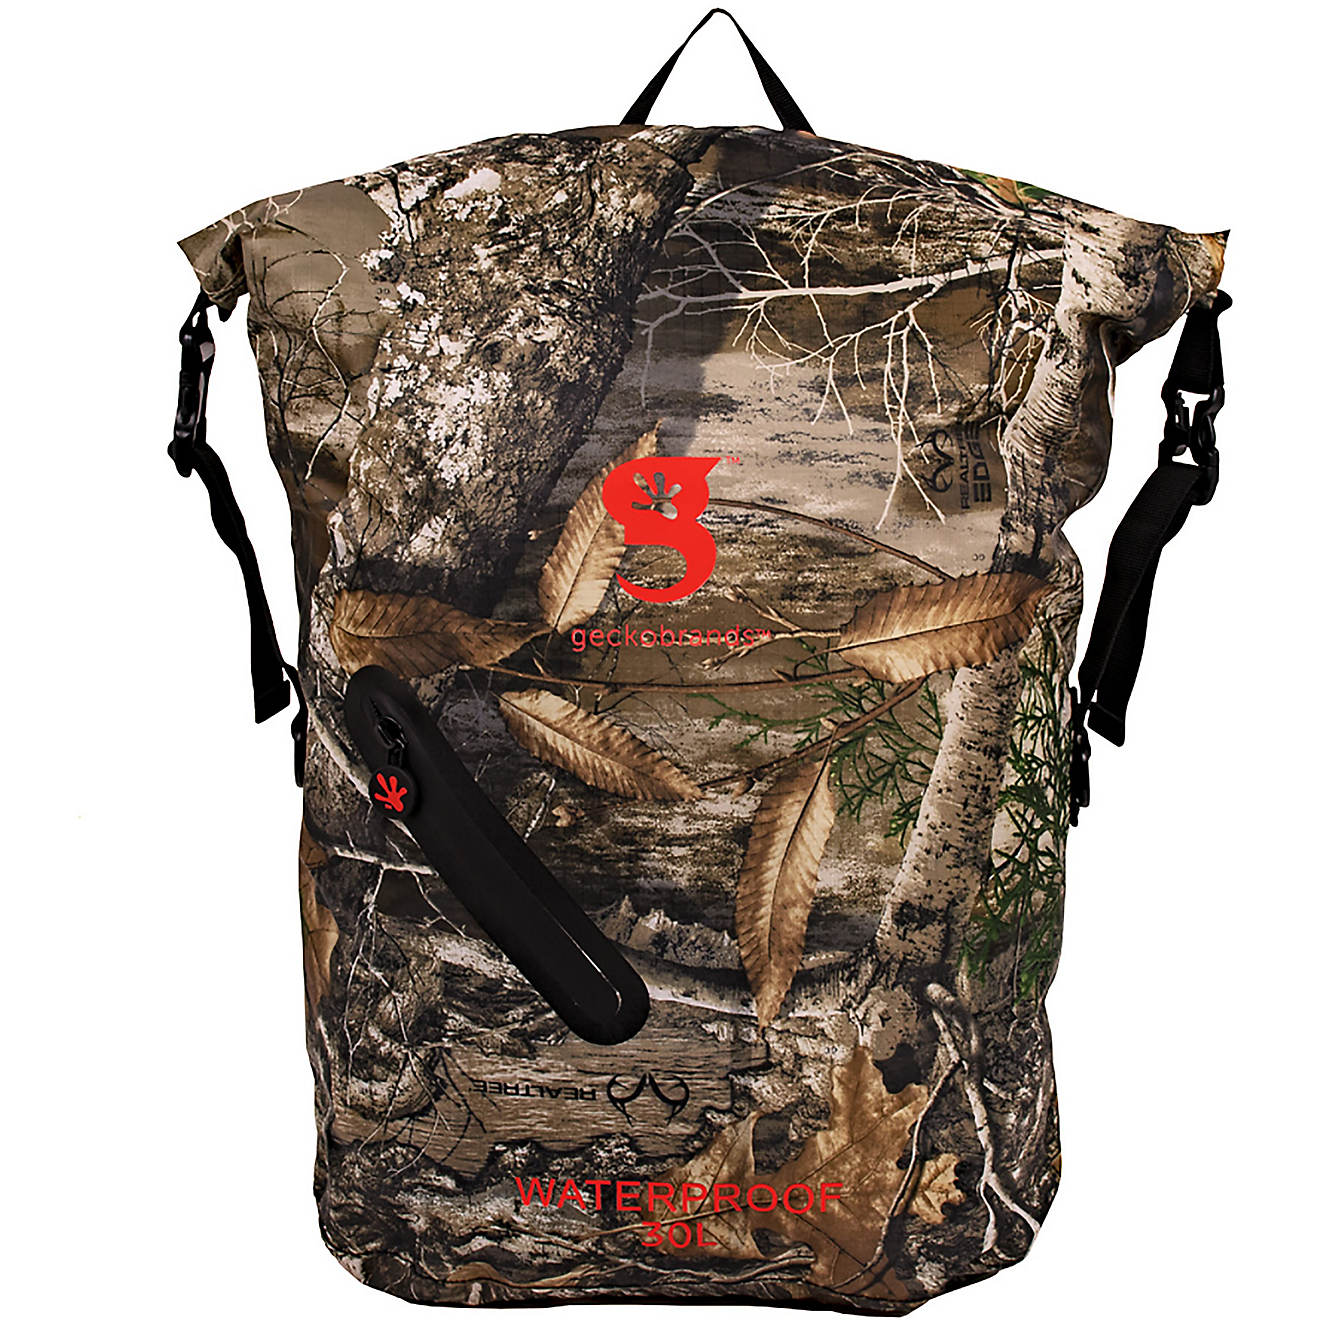 geckobrands Waterproof Realtree Edge Camo 30L Backpack                                                                           - view number 1